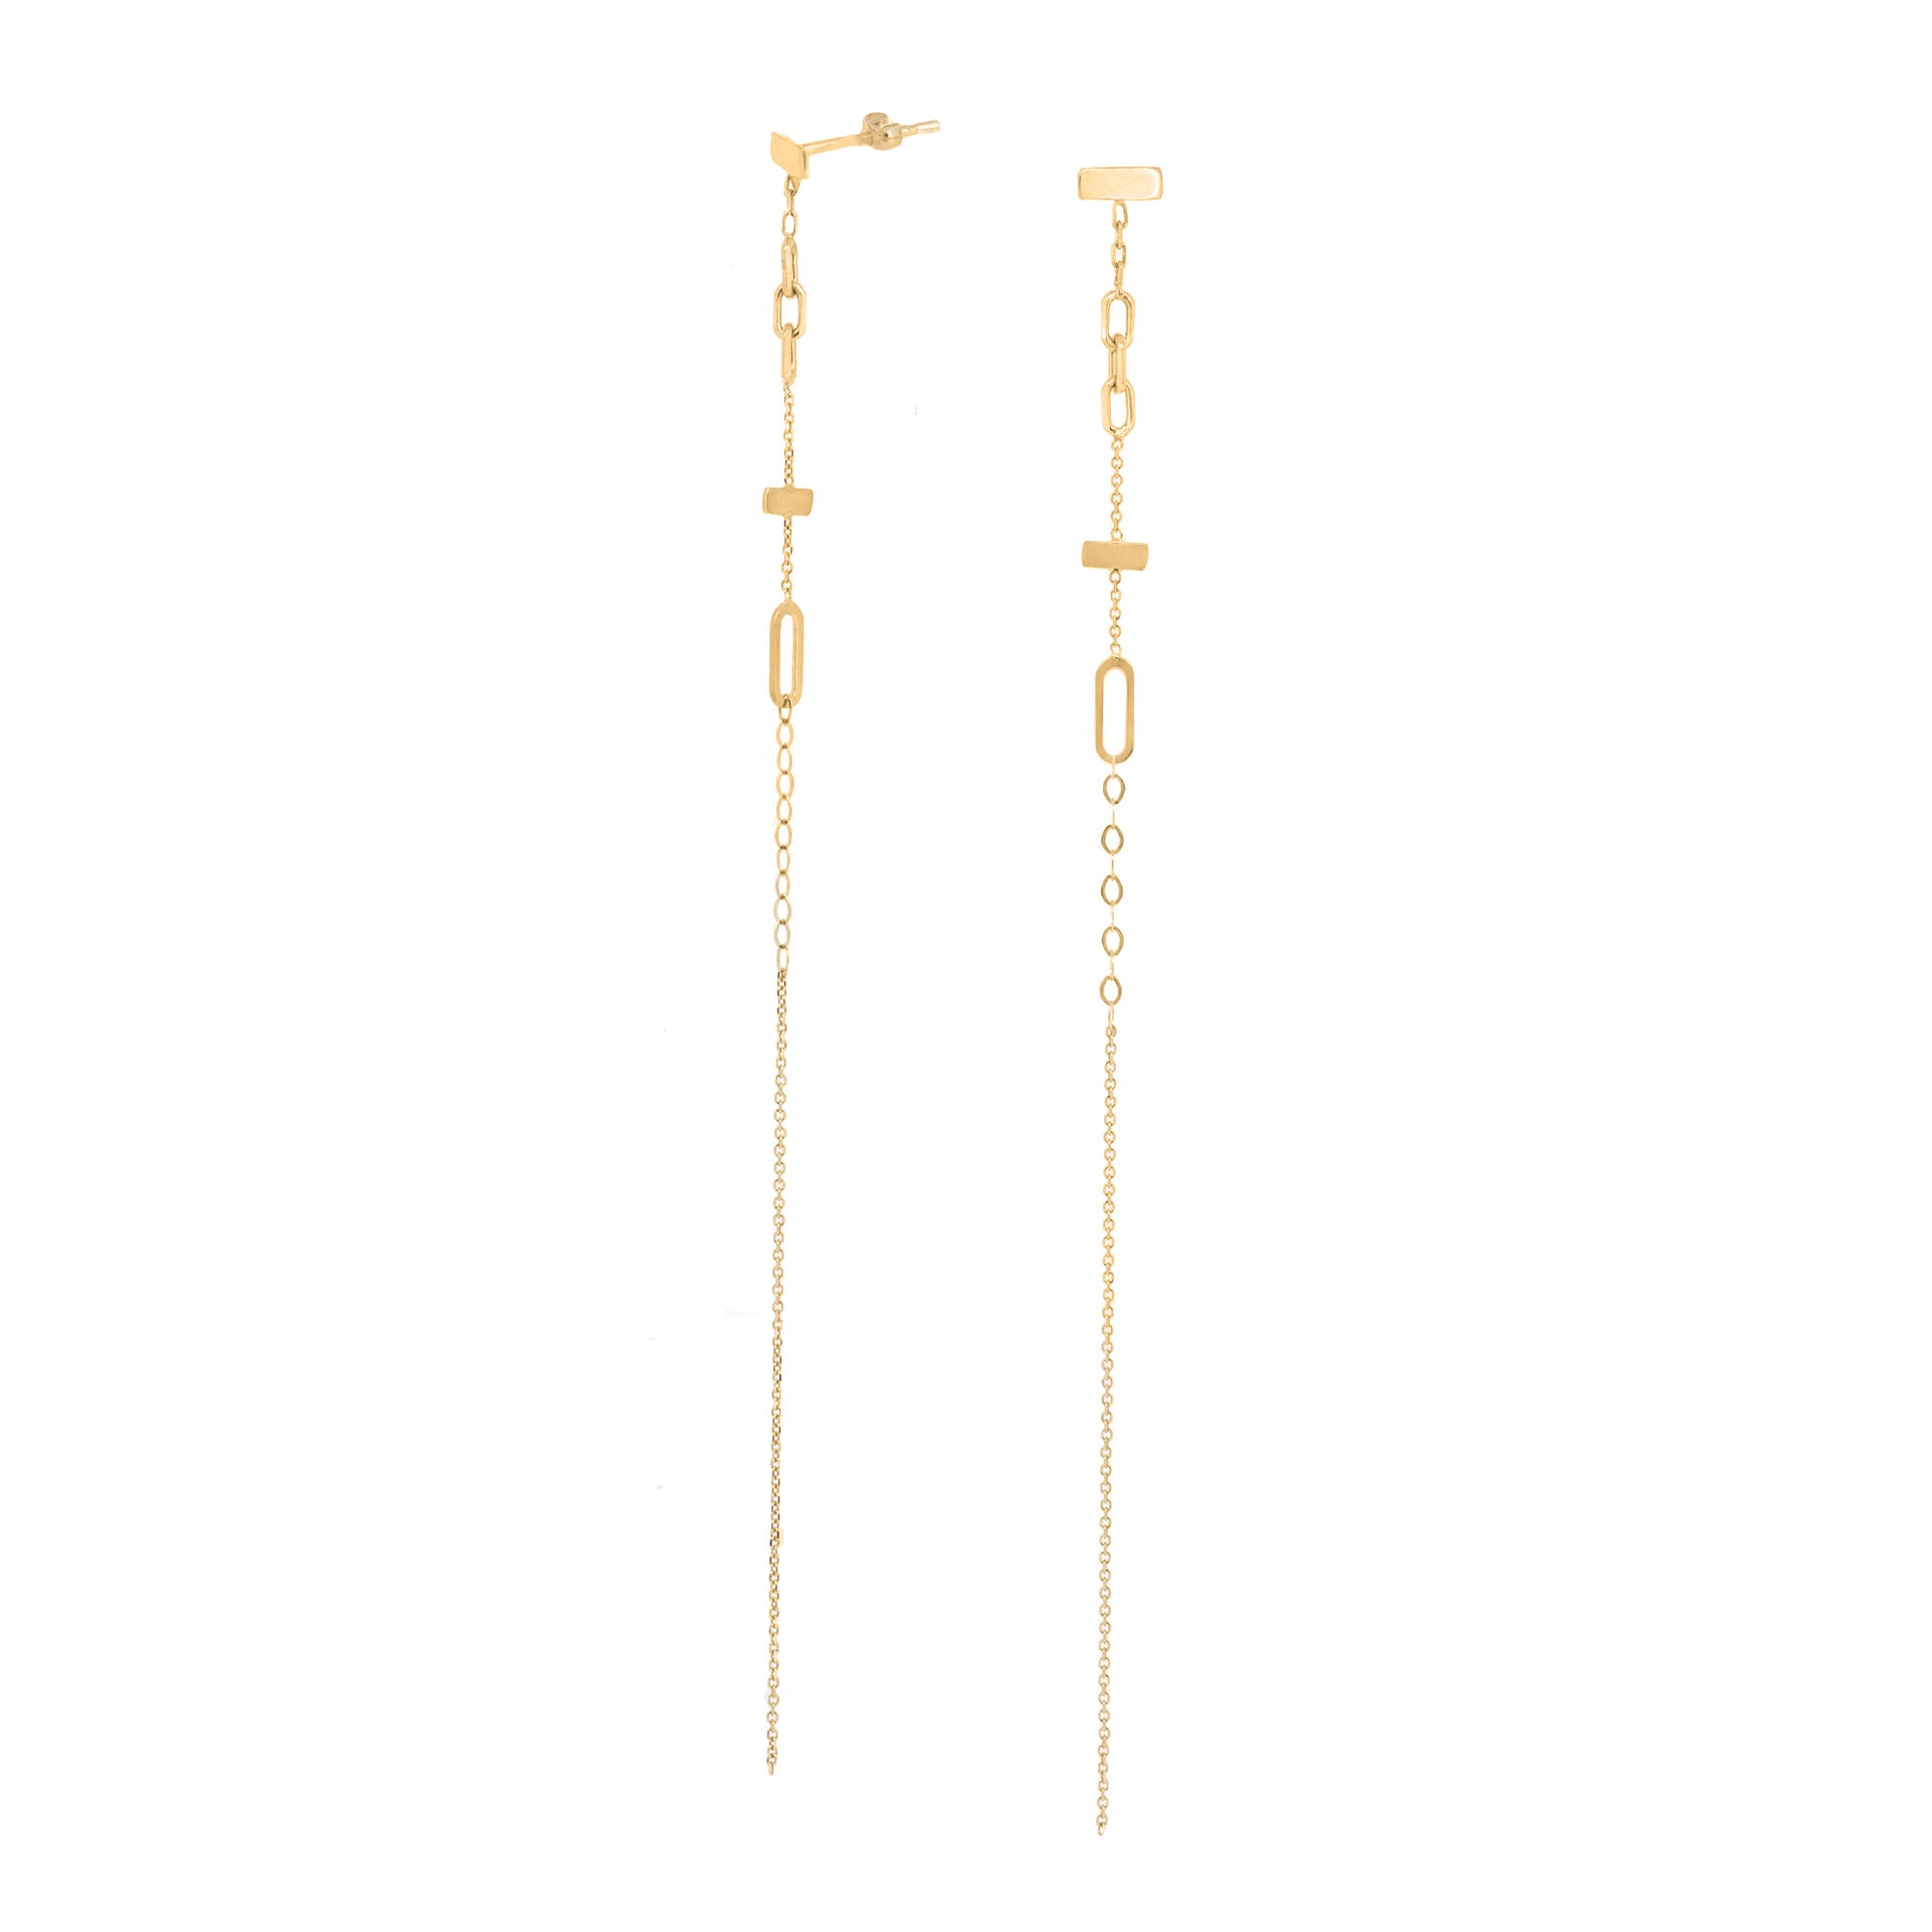 18ct Gold Chains Galore hanging long chain stud earrings.